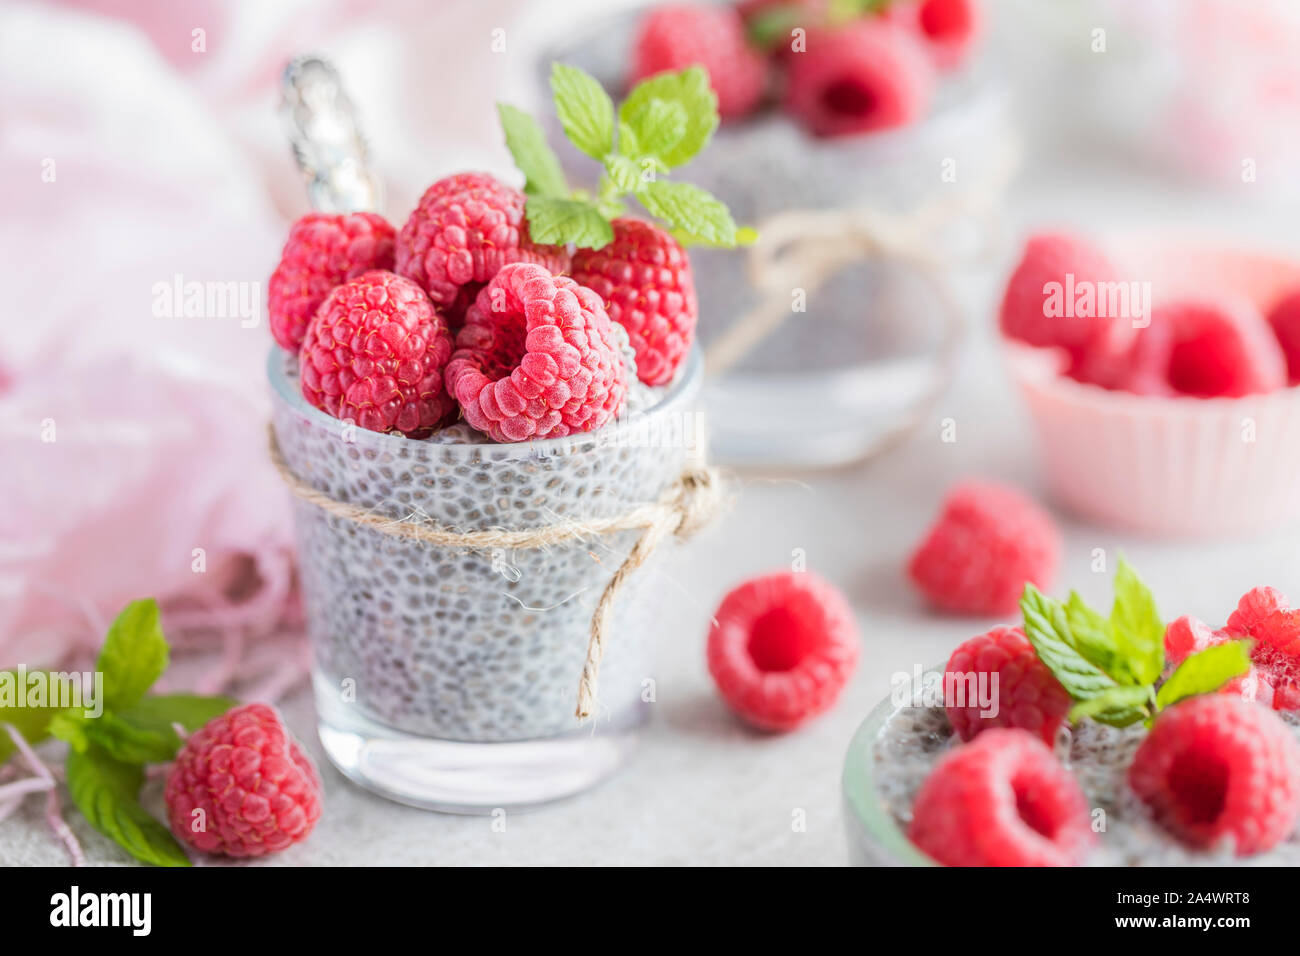 Fresh Chia pudding with fresh raspberries. The pudding is made of Chia seeds, almond milk and agave syrup and is decorated with lemon balm and mint le Stock Photo